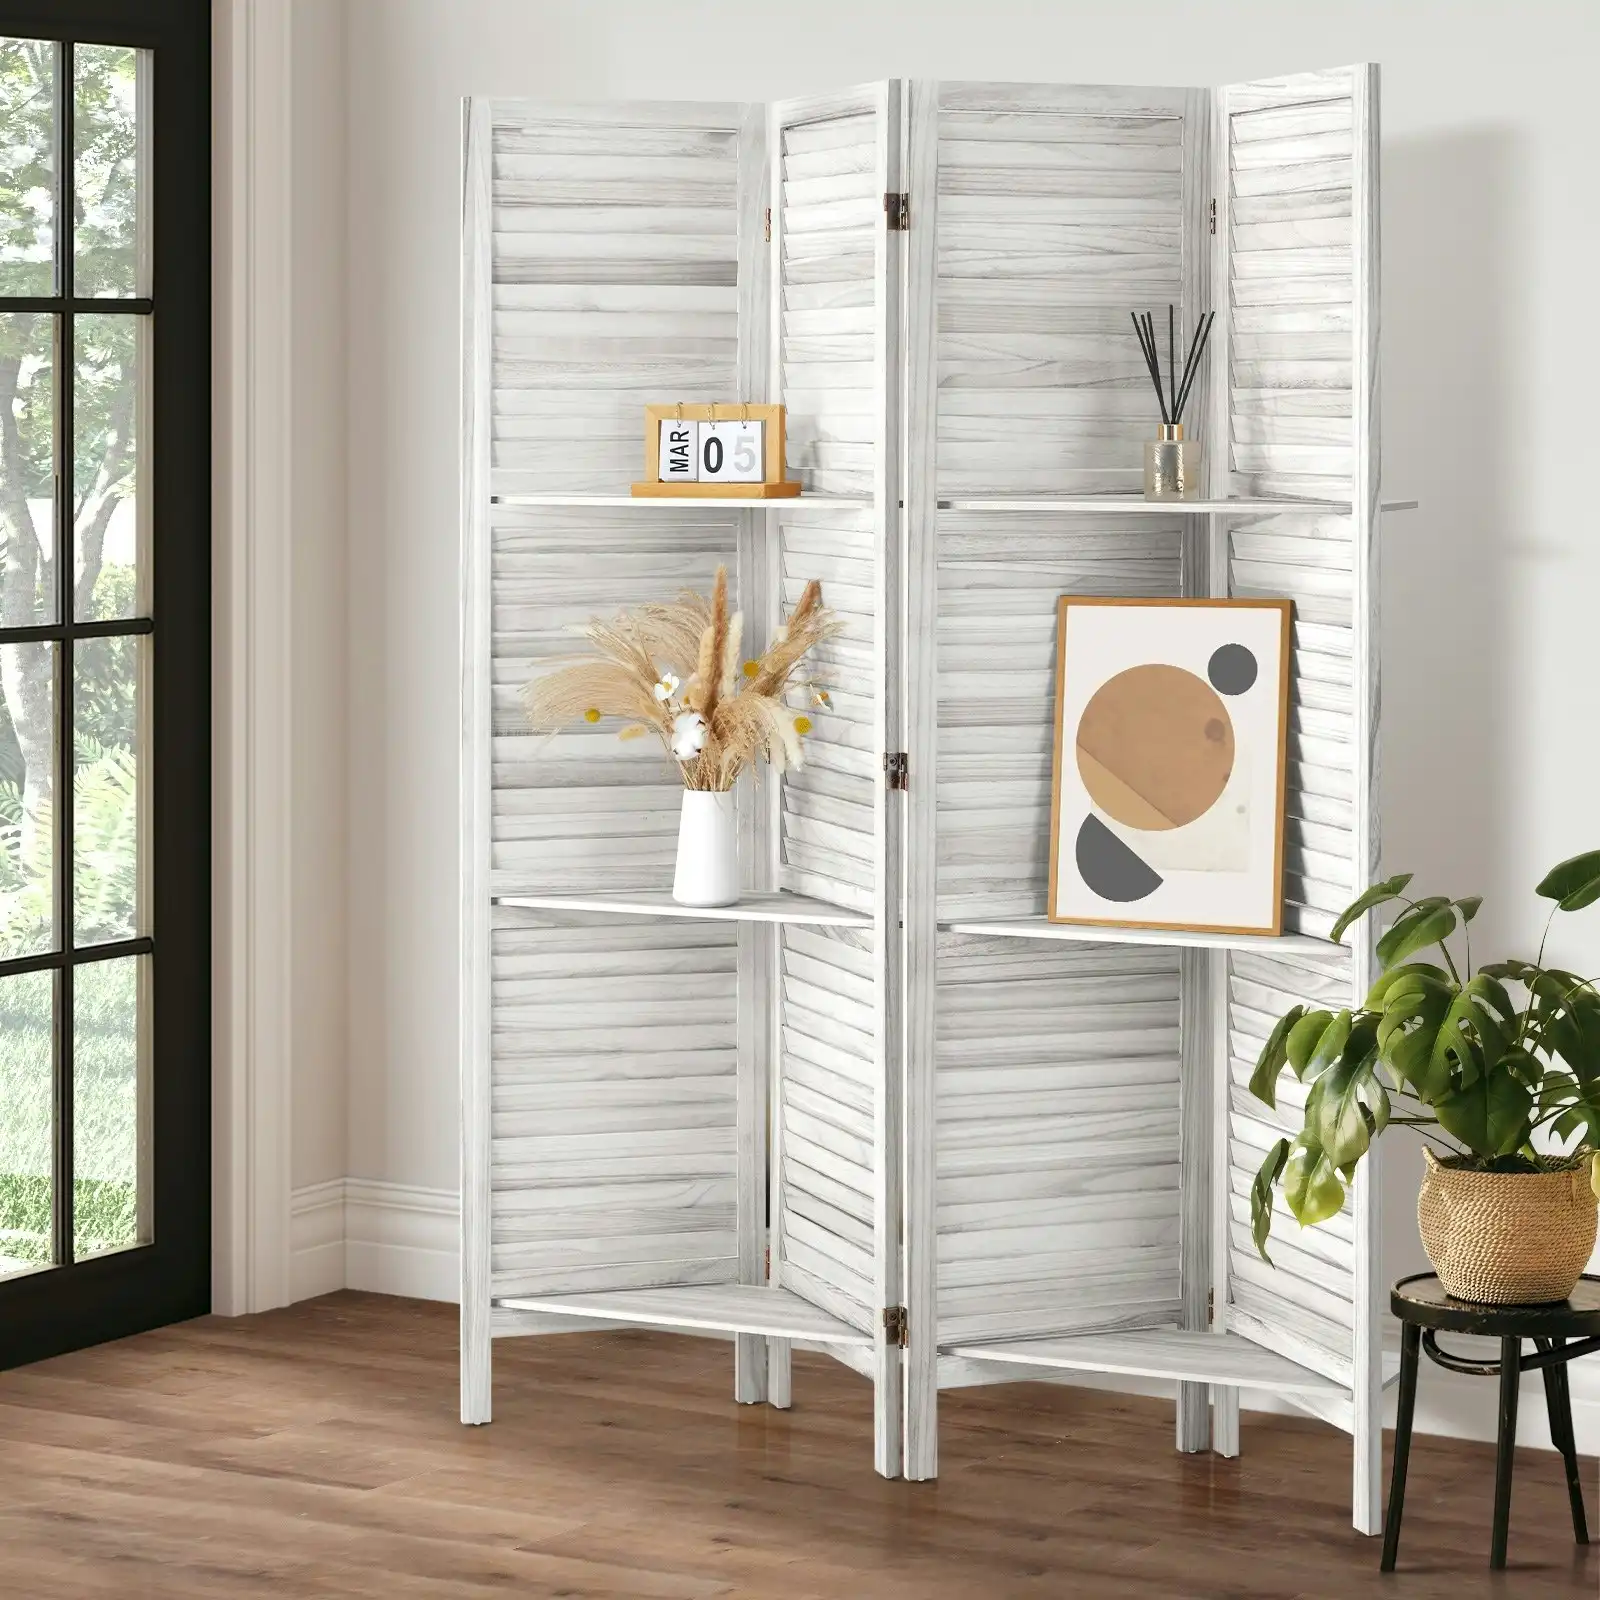 Oikiture 4 Panel Room Divider Privacy Screen With Shelves Timber Wooden White